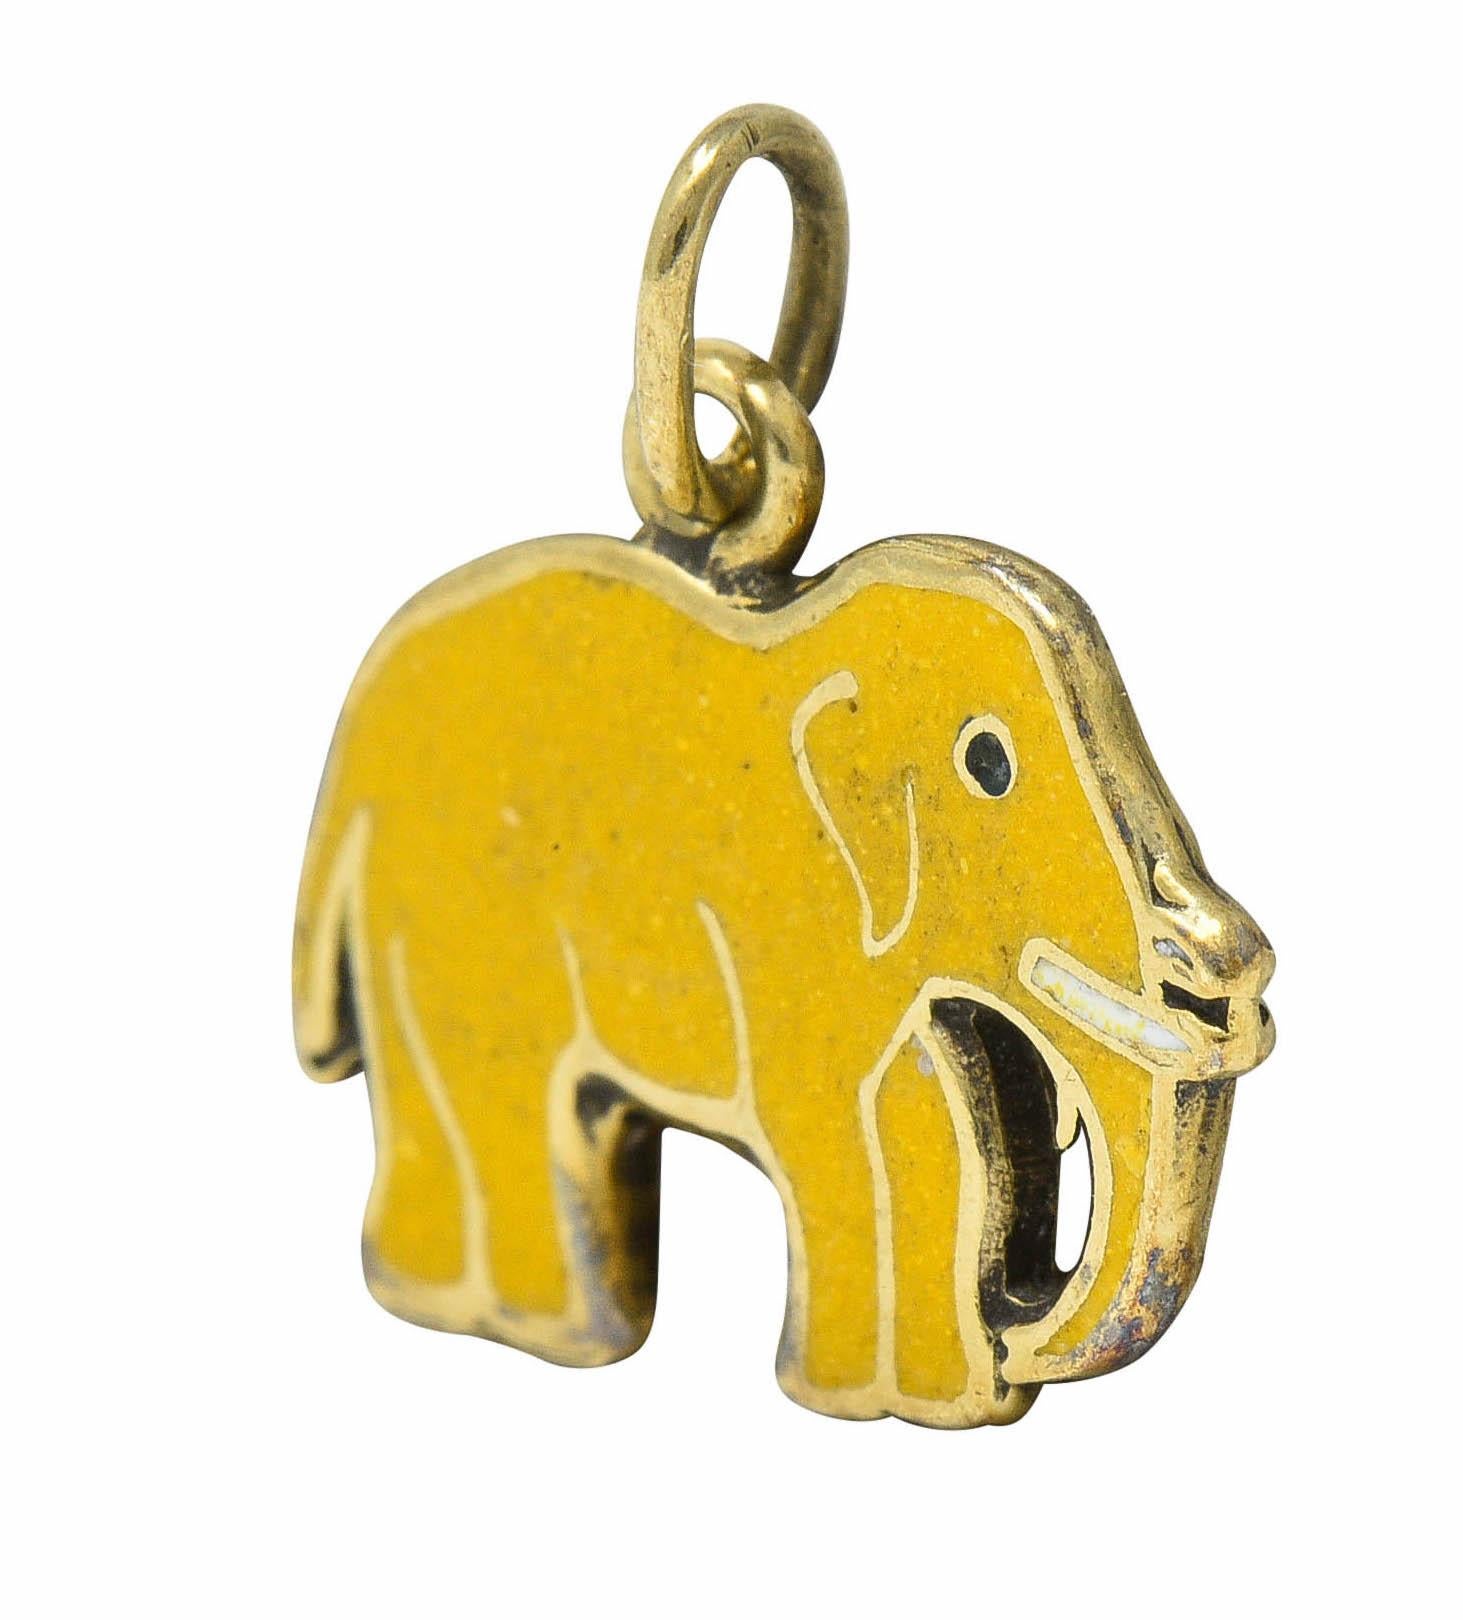 Charm is designed as a stylized elephant glossed with yellow enamel, exhibiting minimal loss

With black enamel eyes and white enamel tusks

Depiction is featured on both sides of charm

Tested as 14 karat gold

Circa: 1920

Measures: 9/16 x 9/16